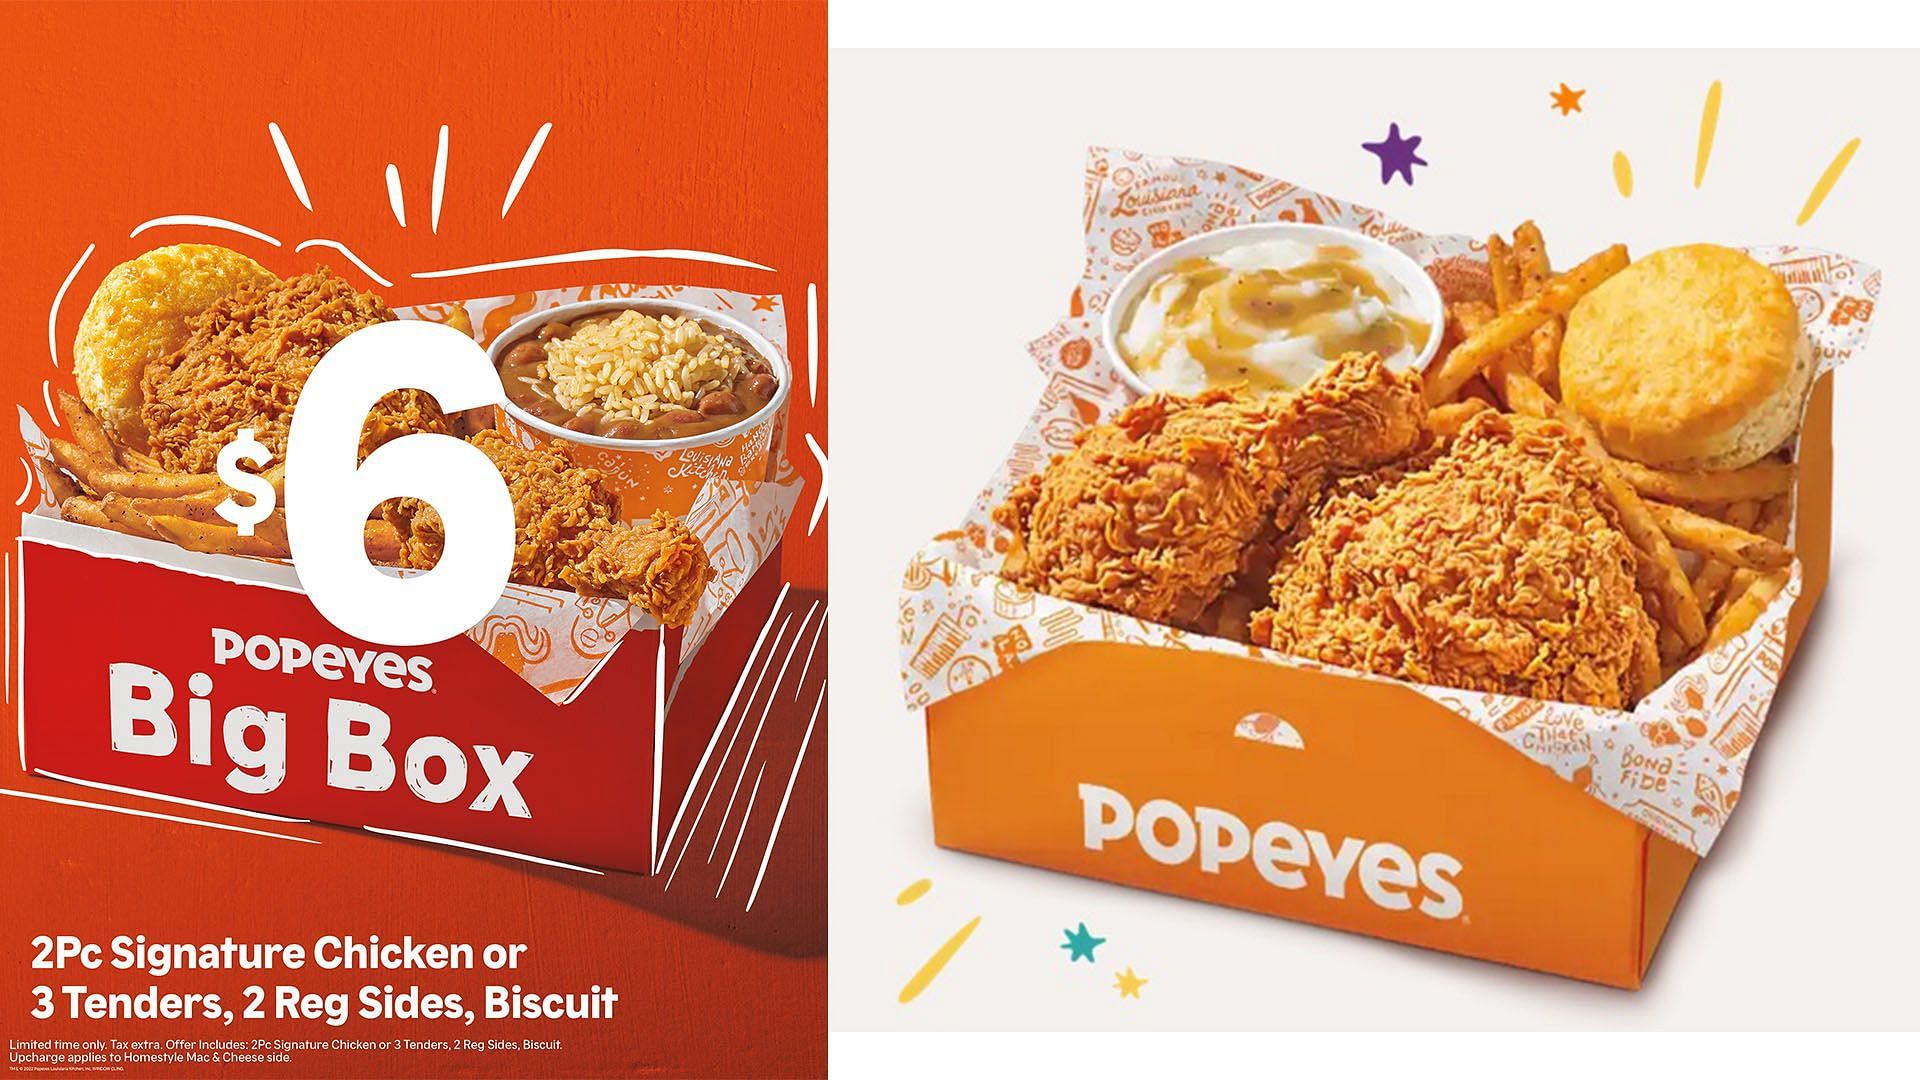 calories in popeyes biscuit